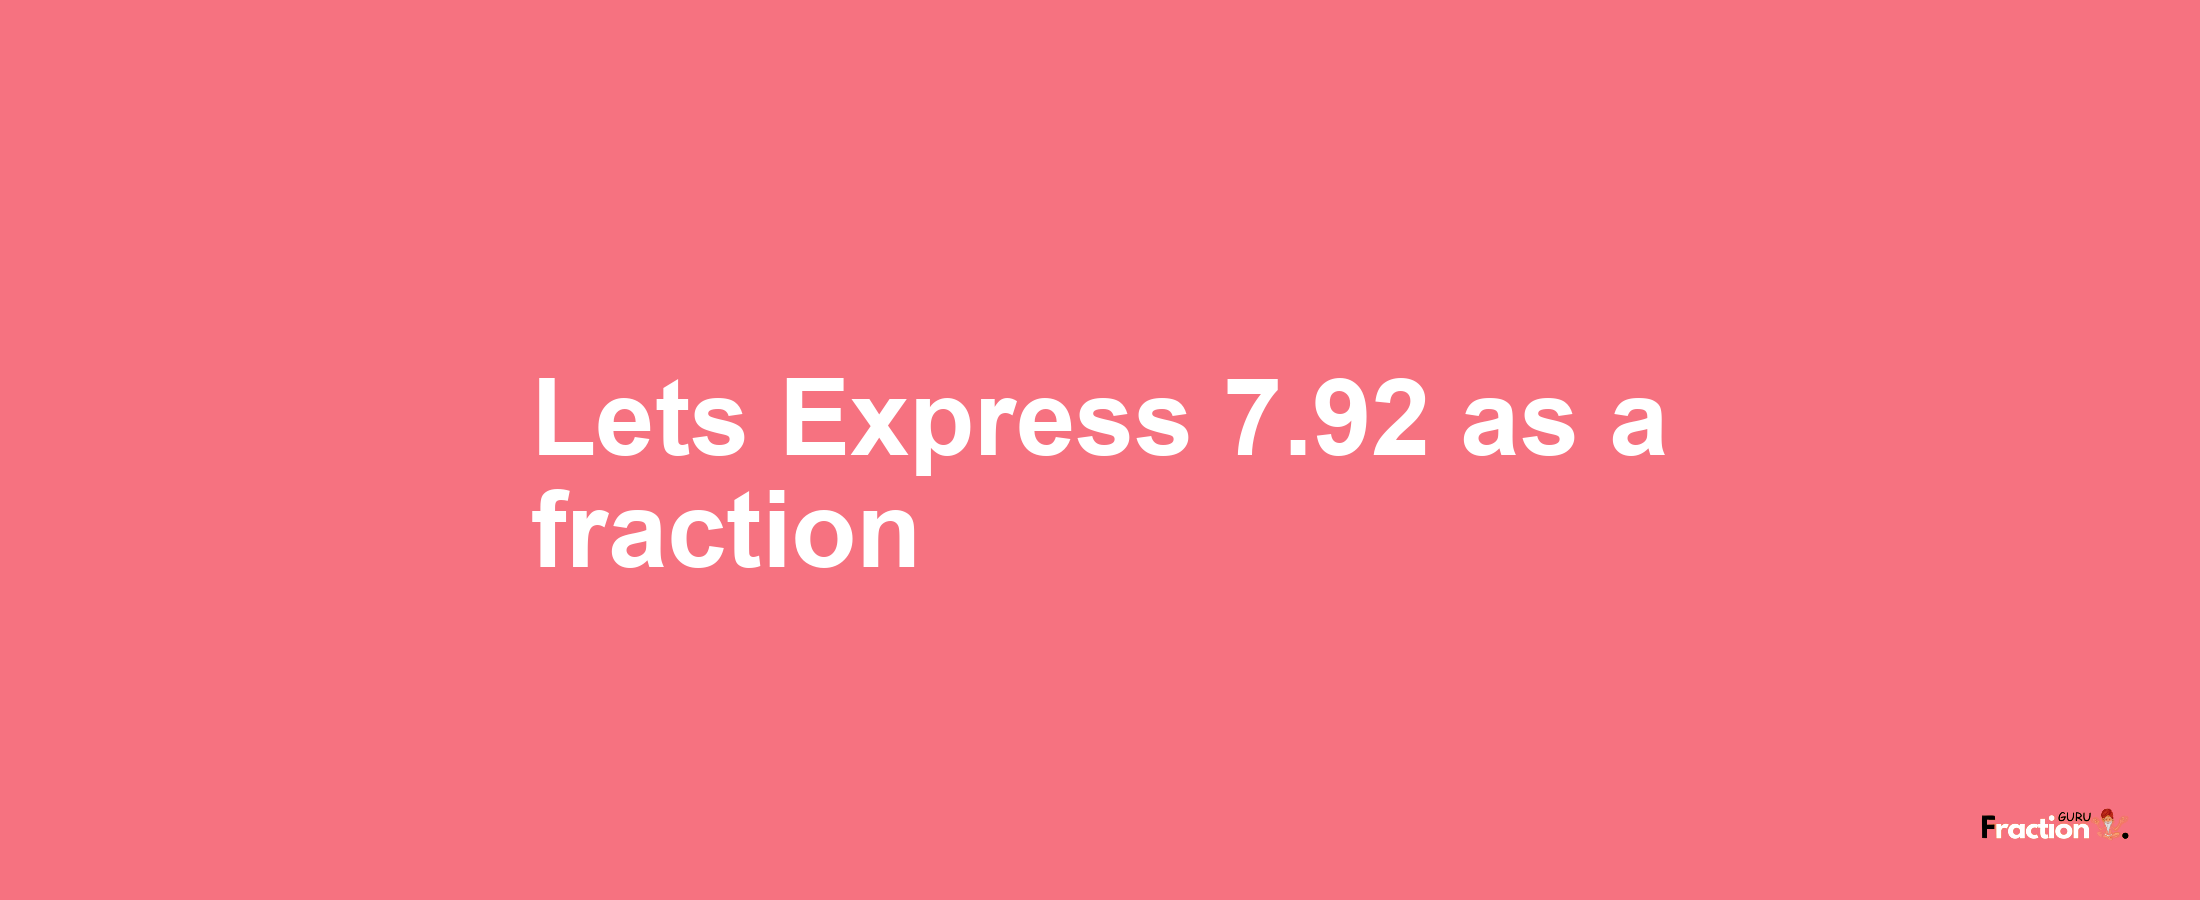 Lets Express 7.92 as afraction